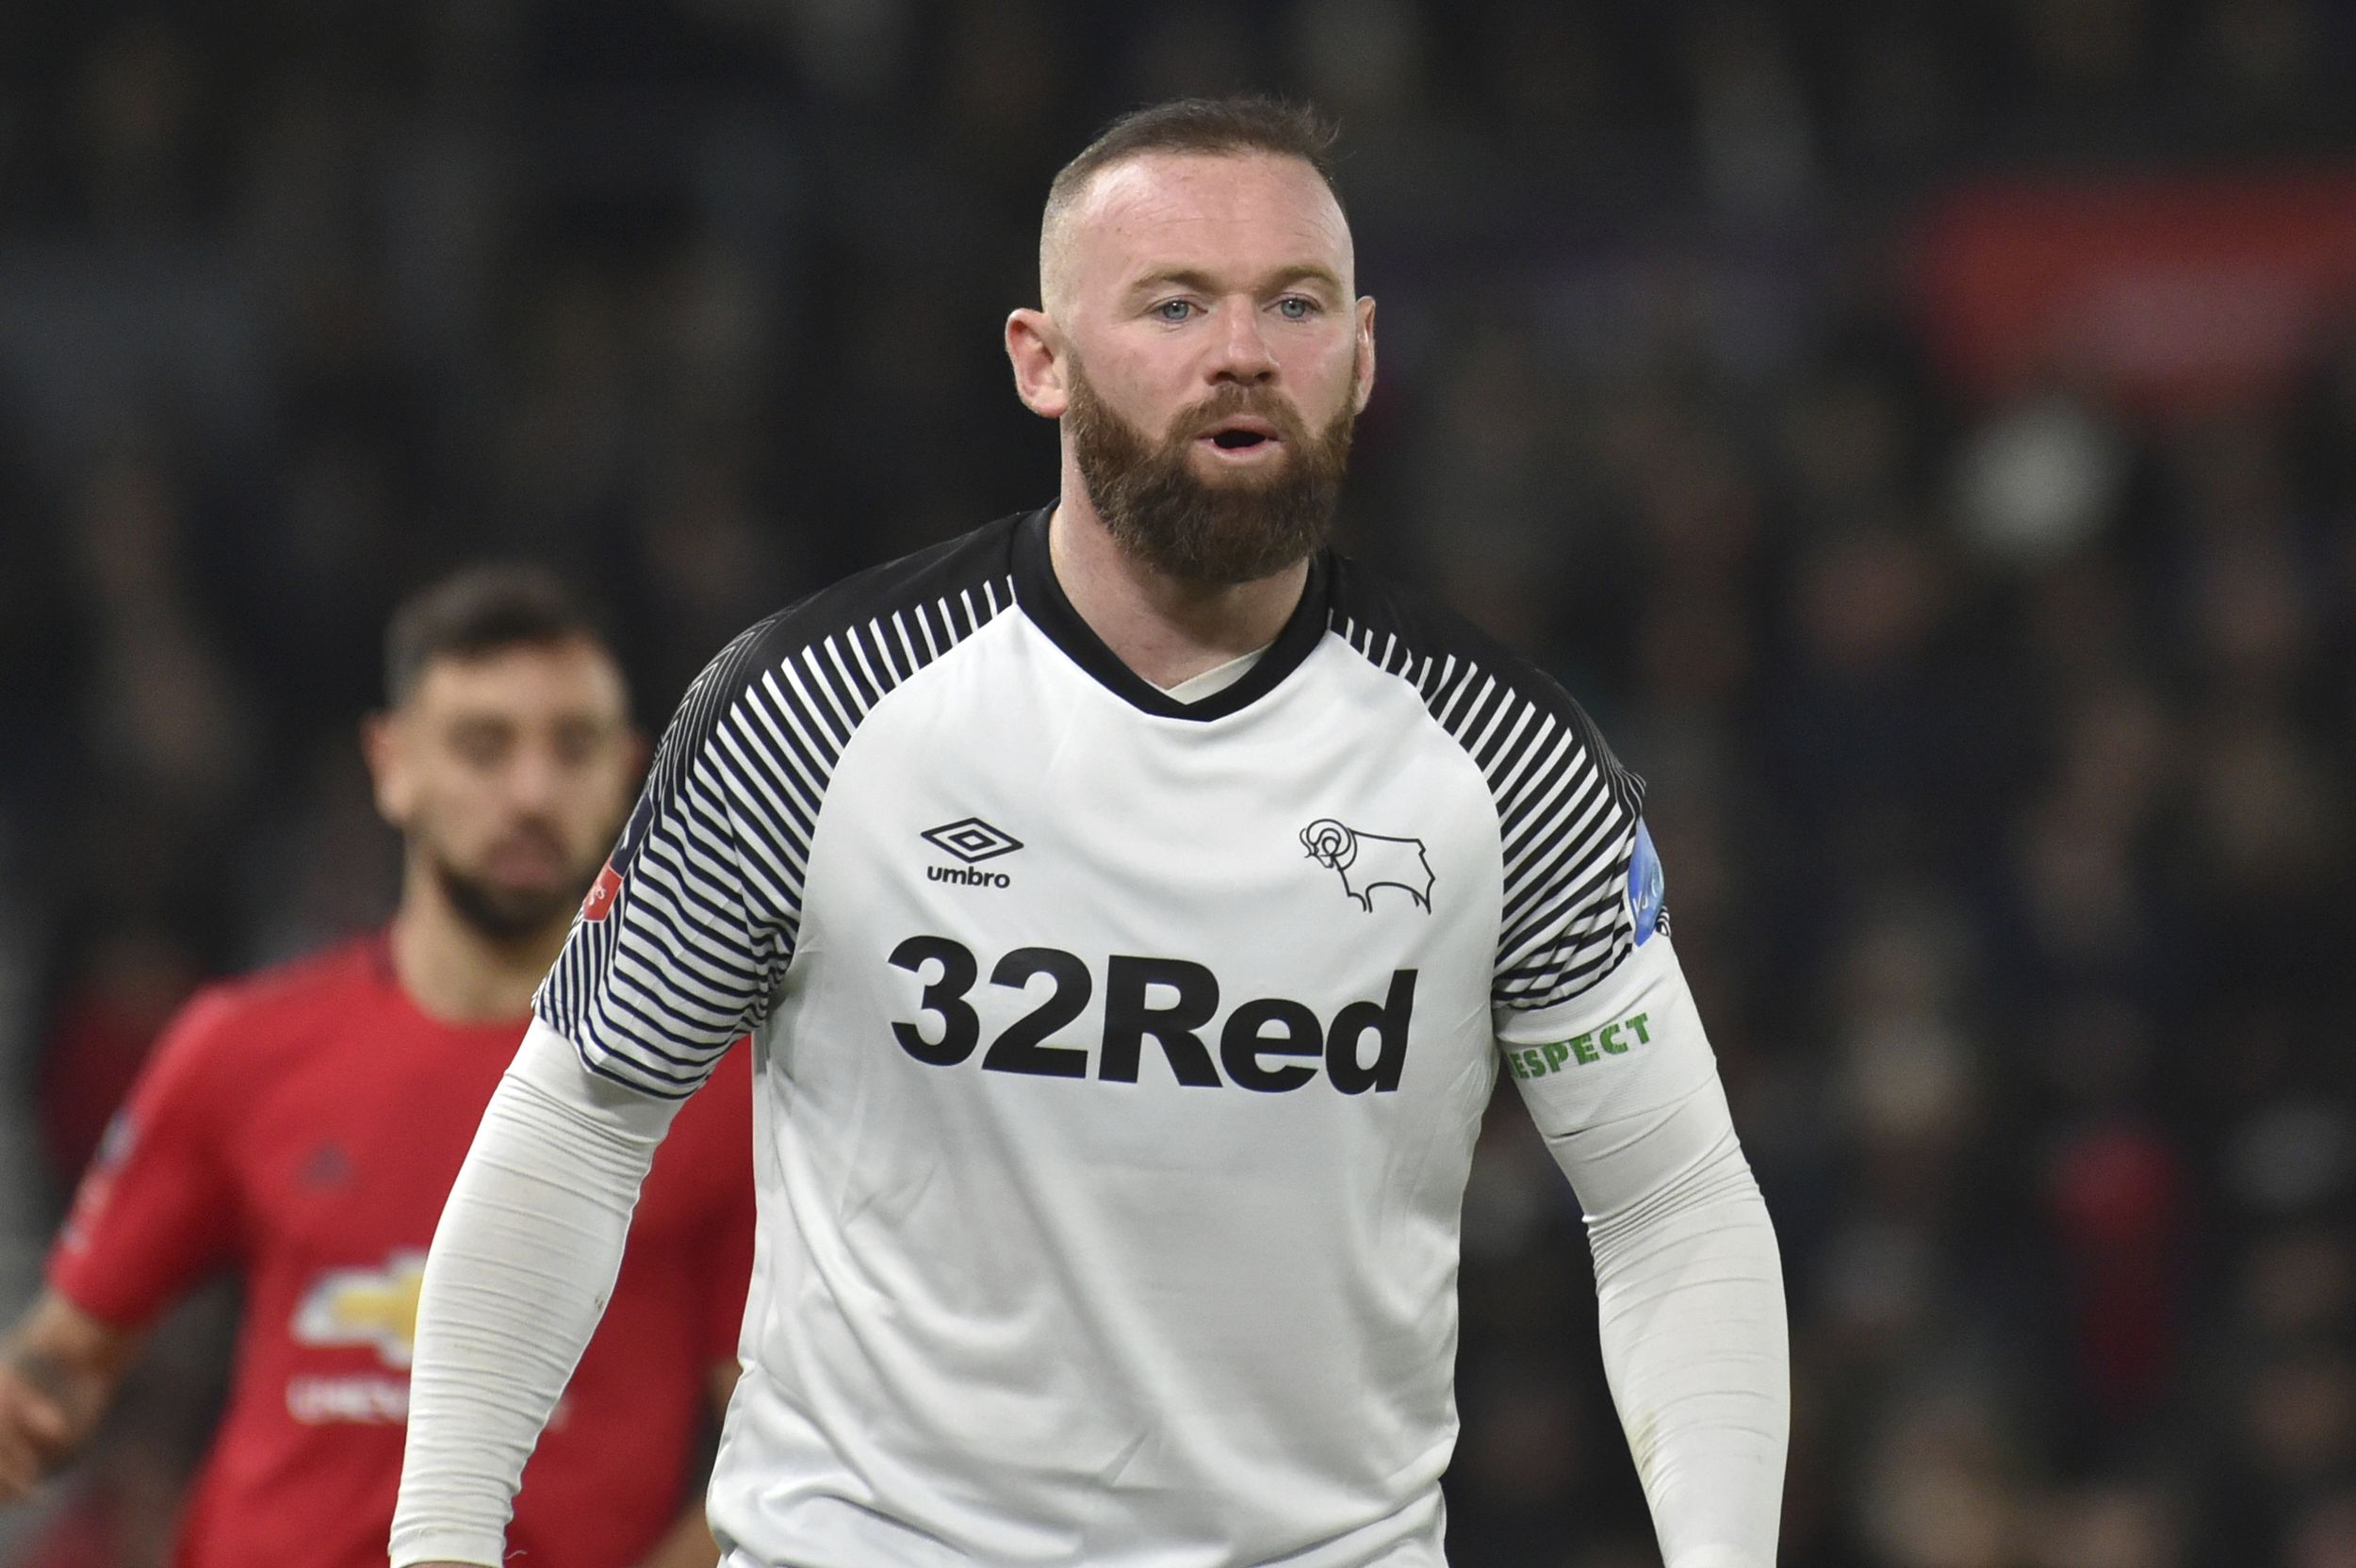 Wayne Rooney stops playing to take Derby manager job permanently | The